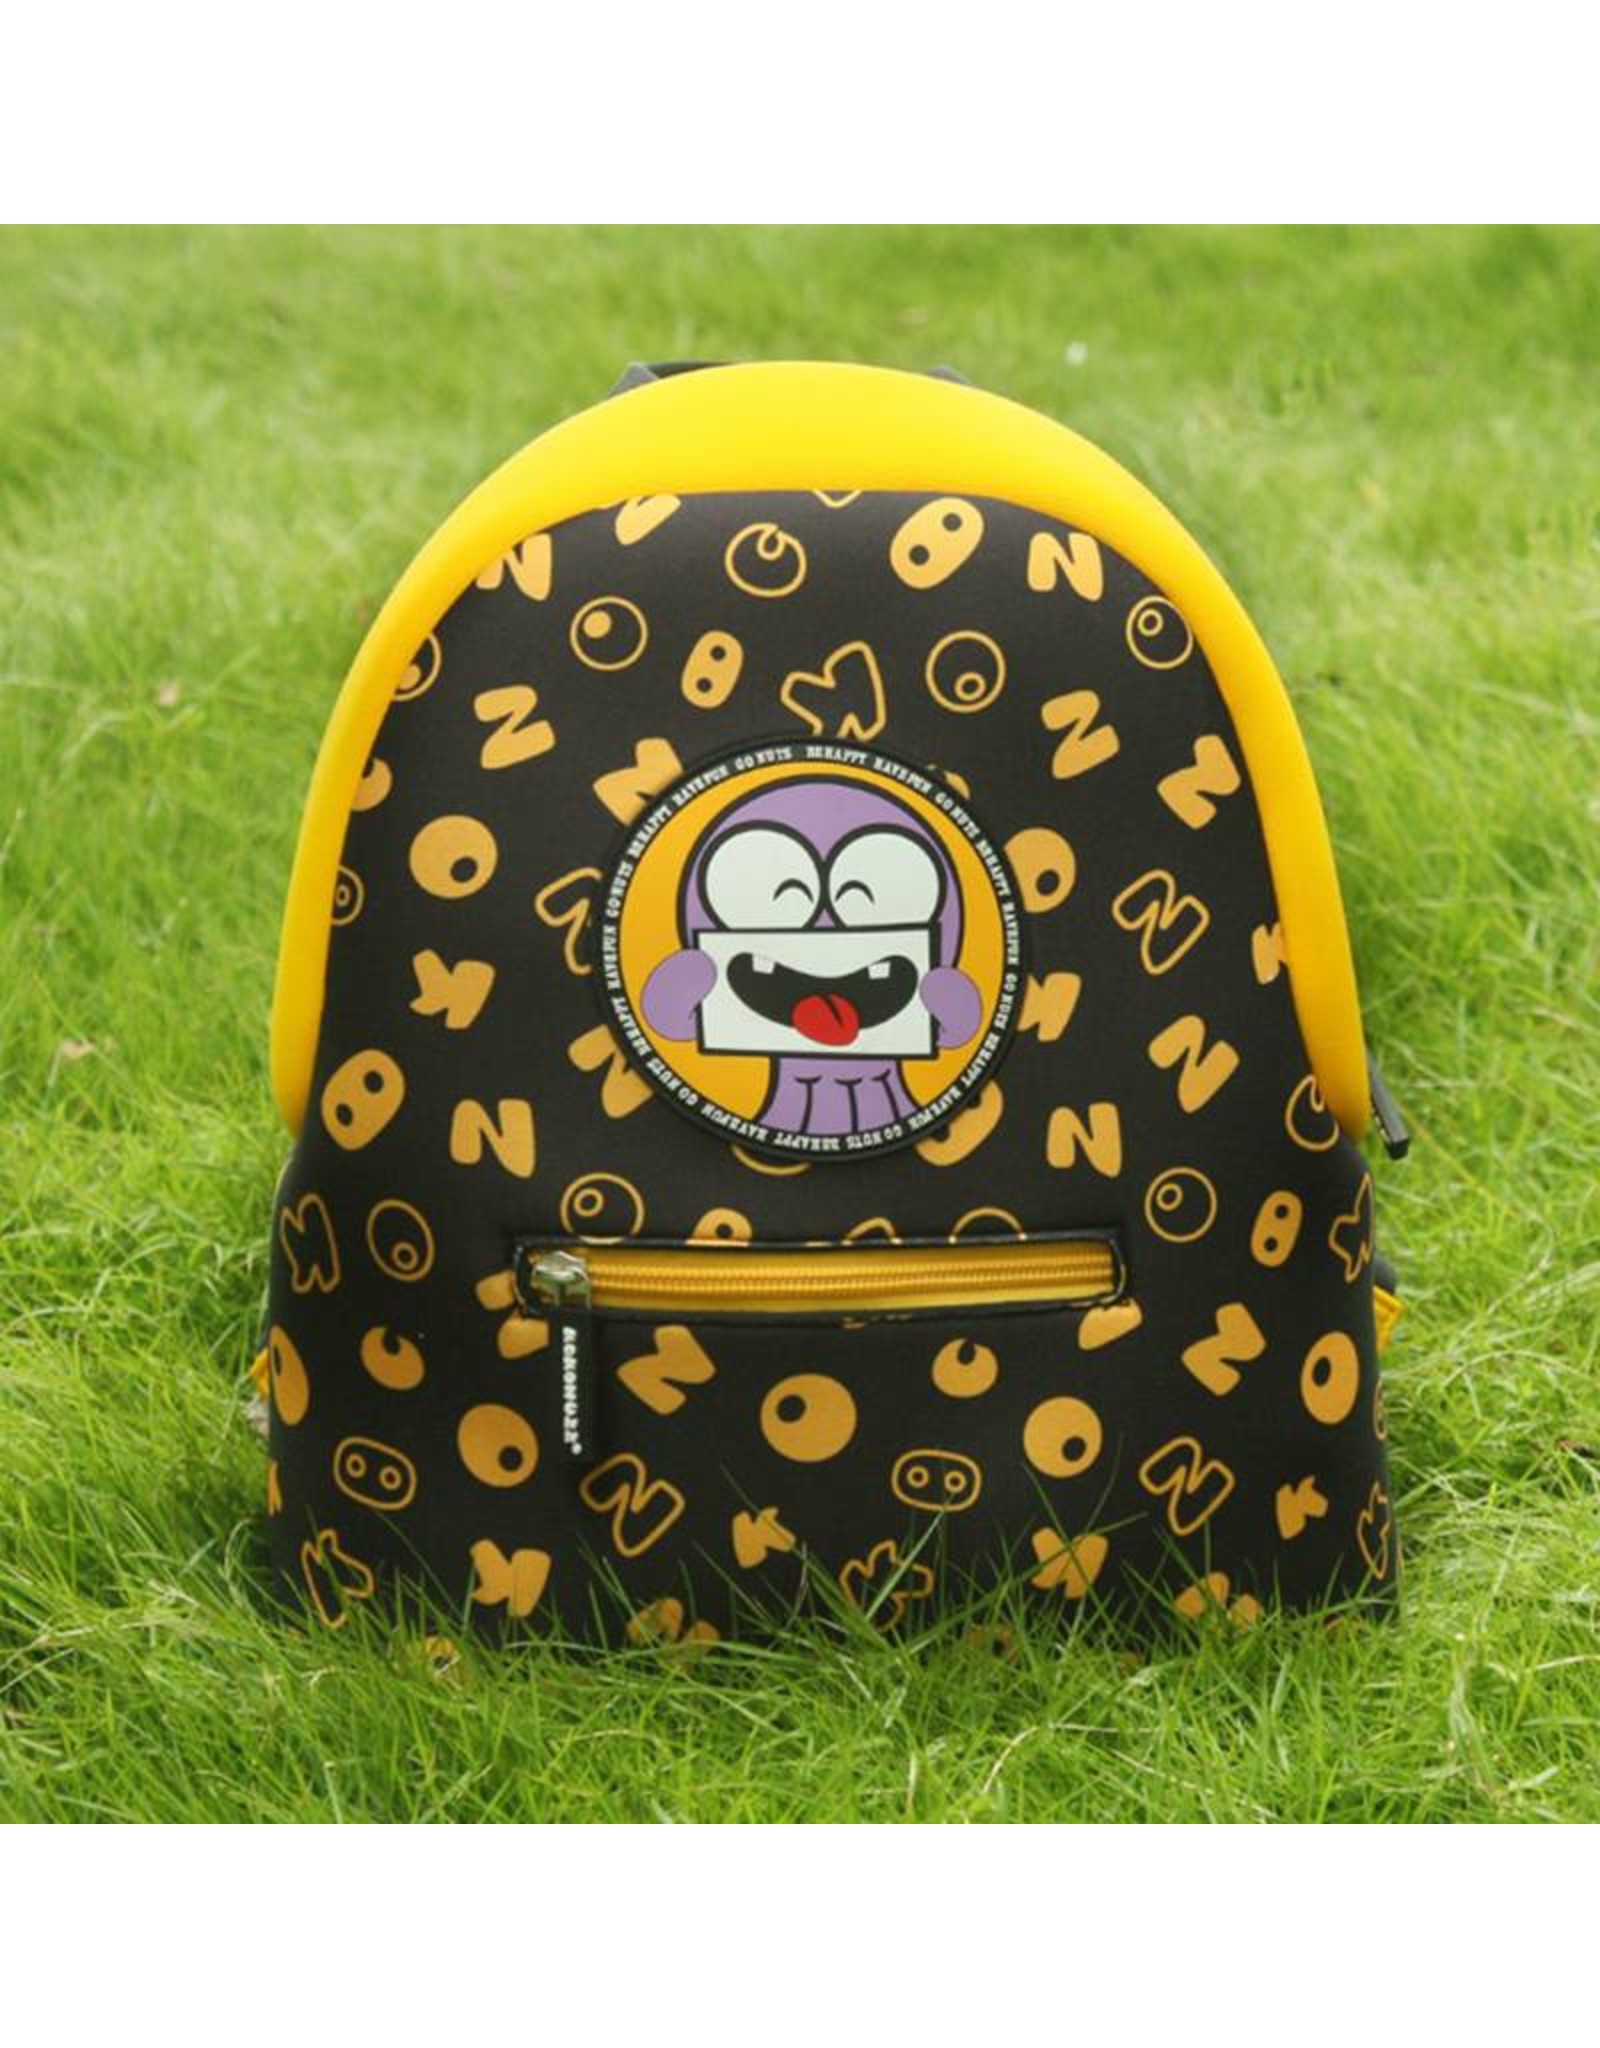 Childerns backpack Be Happy (Yellow)